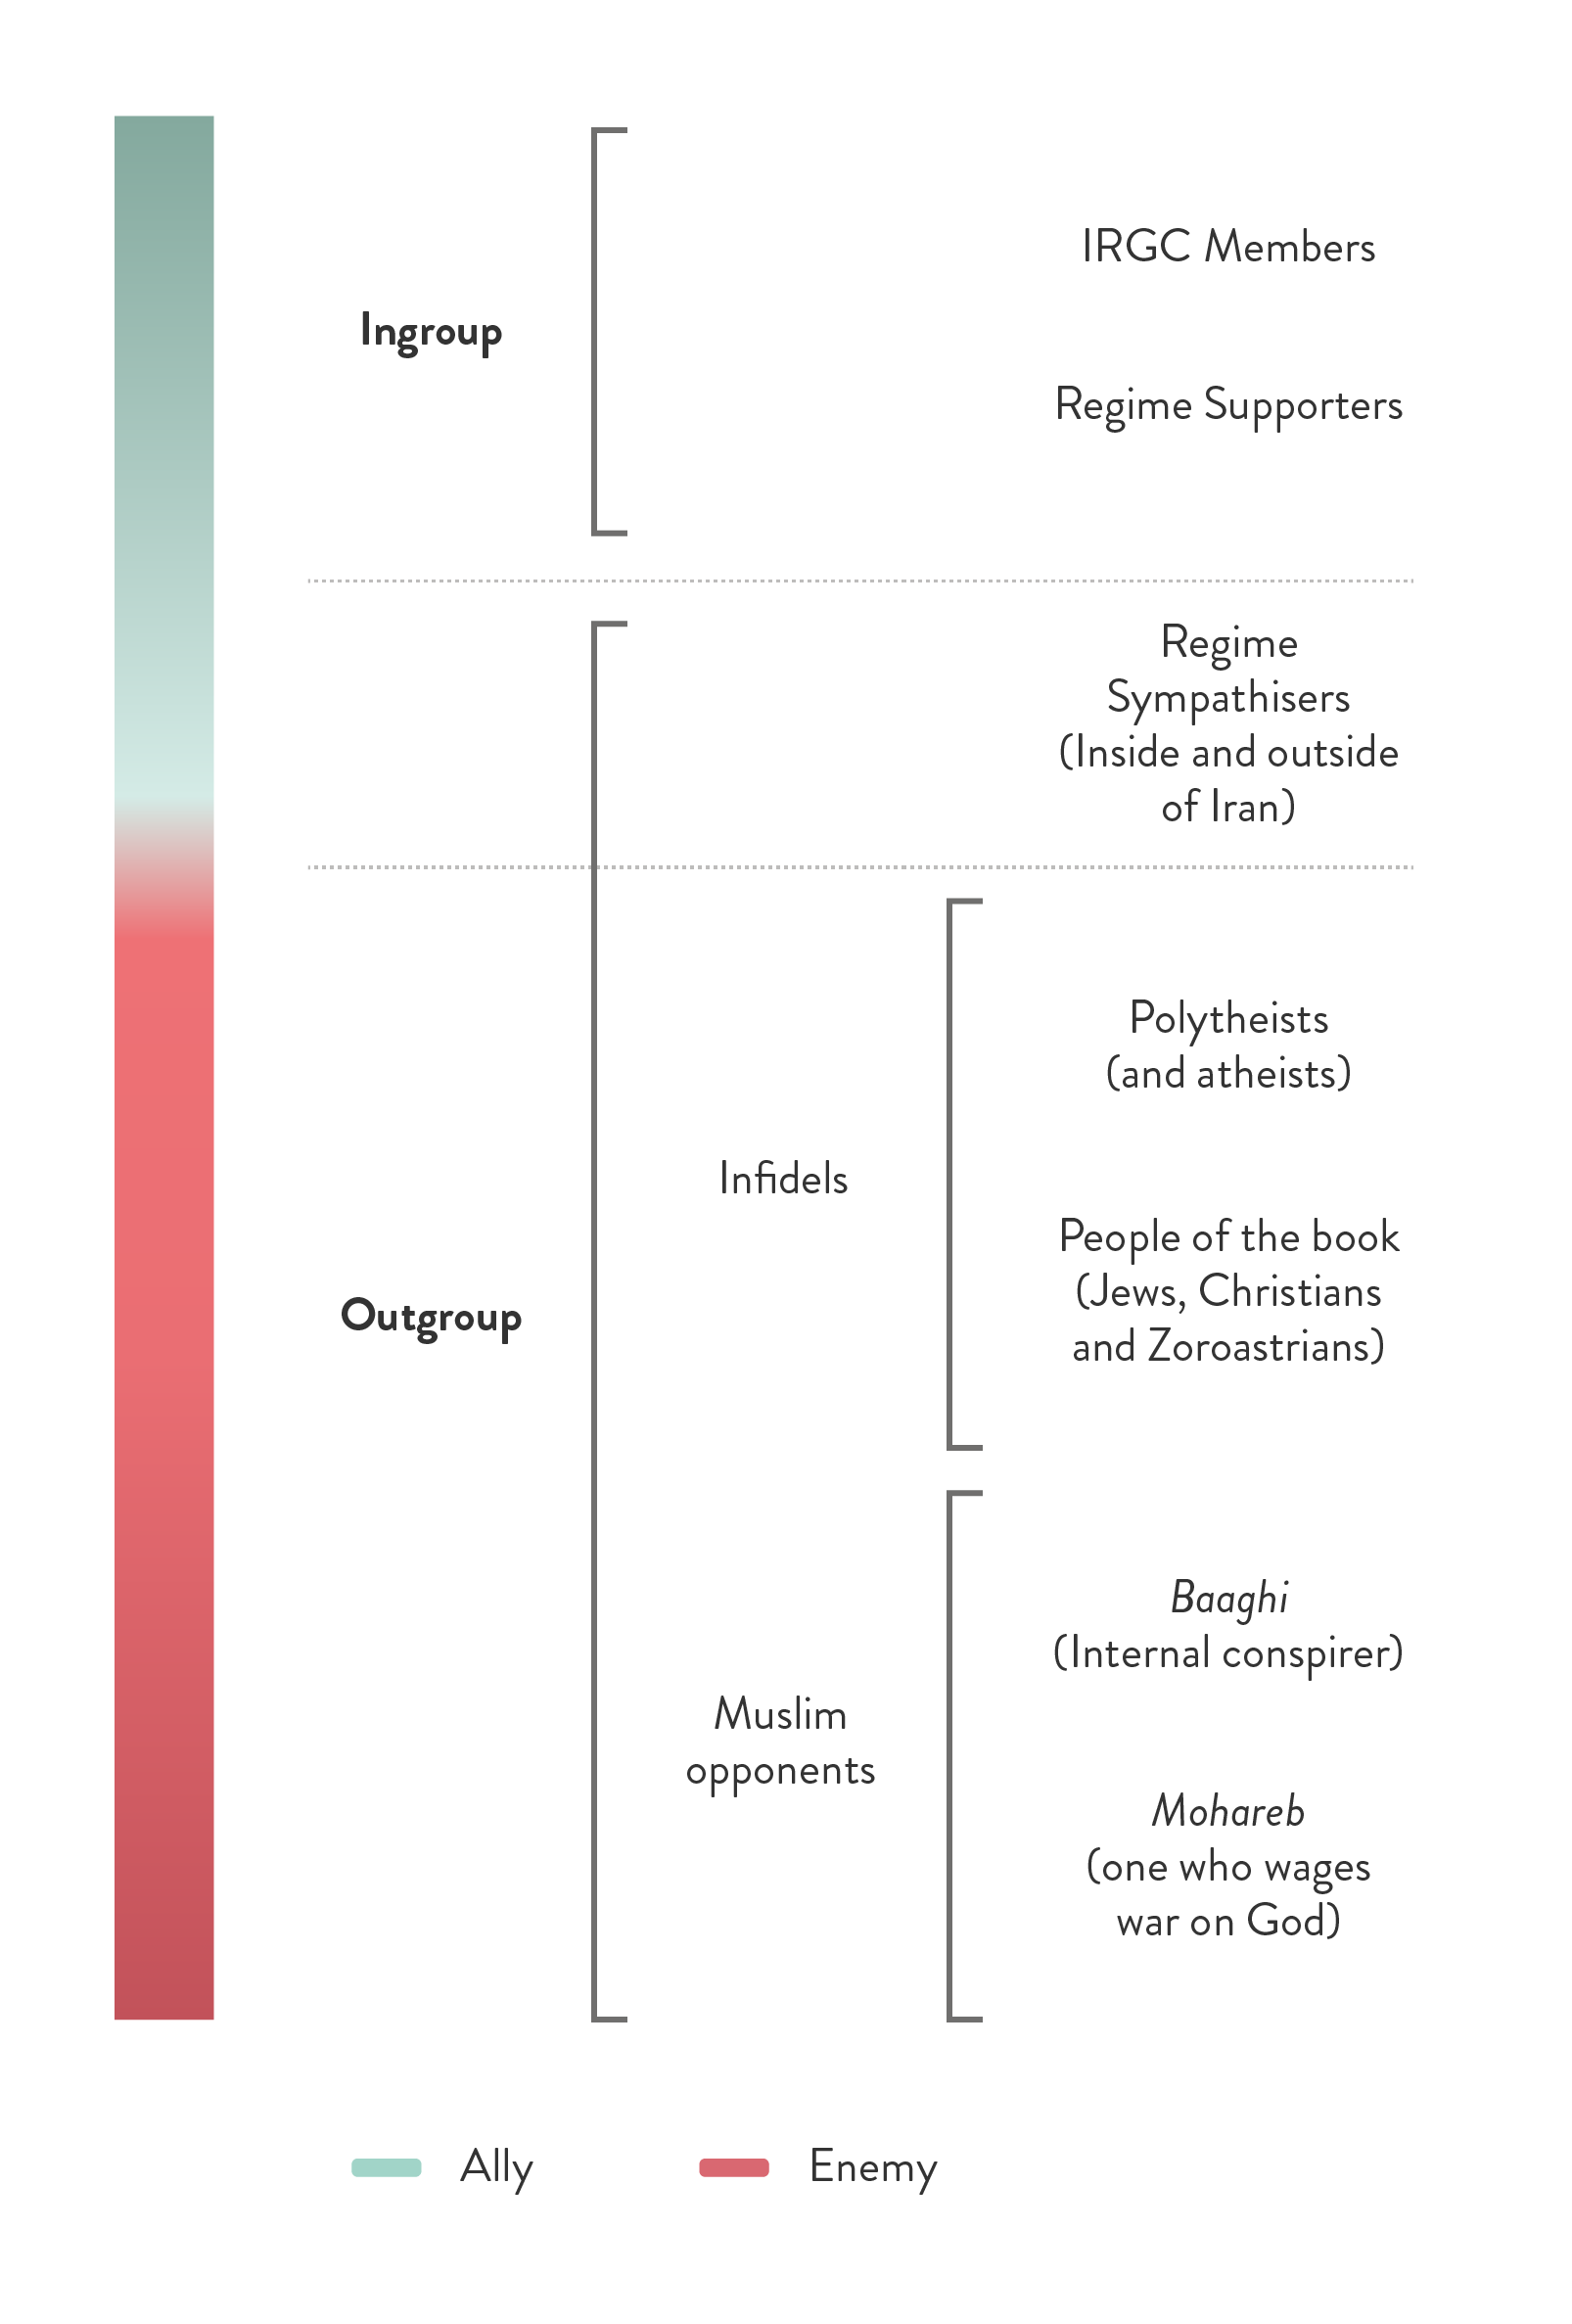 Figure 8: Ingroup and Outgroups: The IRGC’s Spectrum of Allies and Enemies